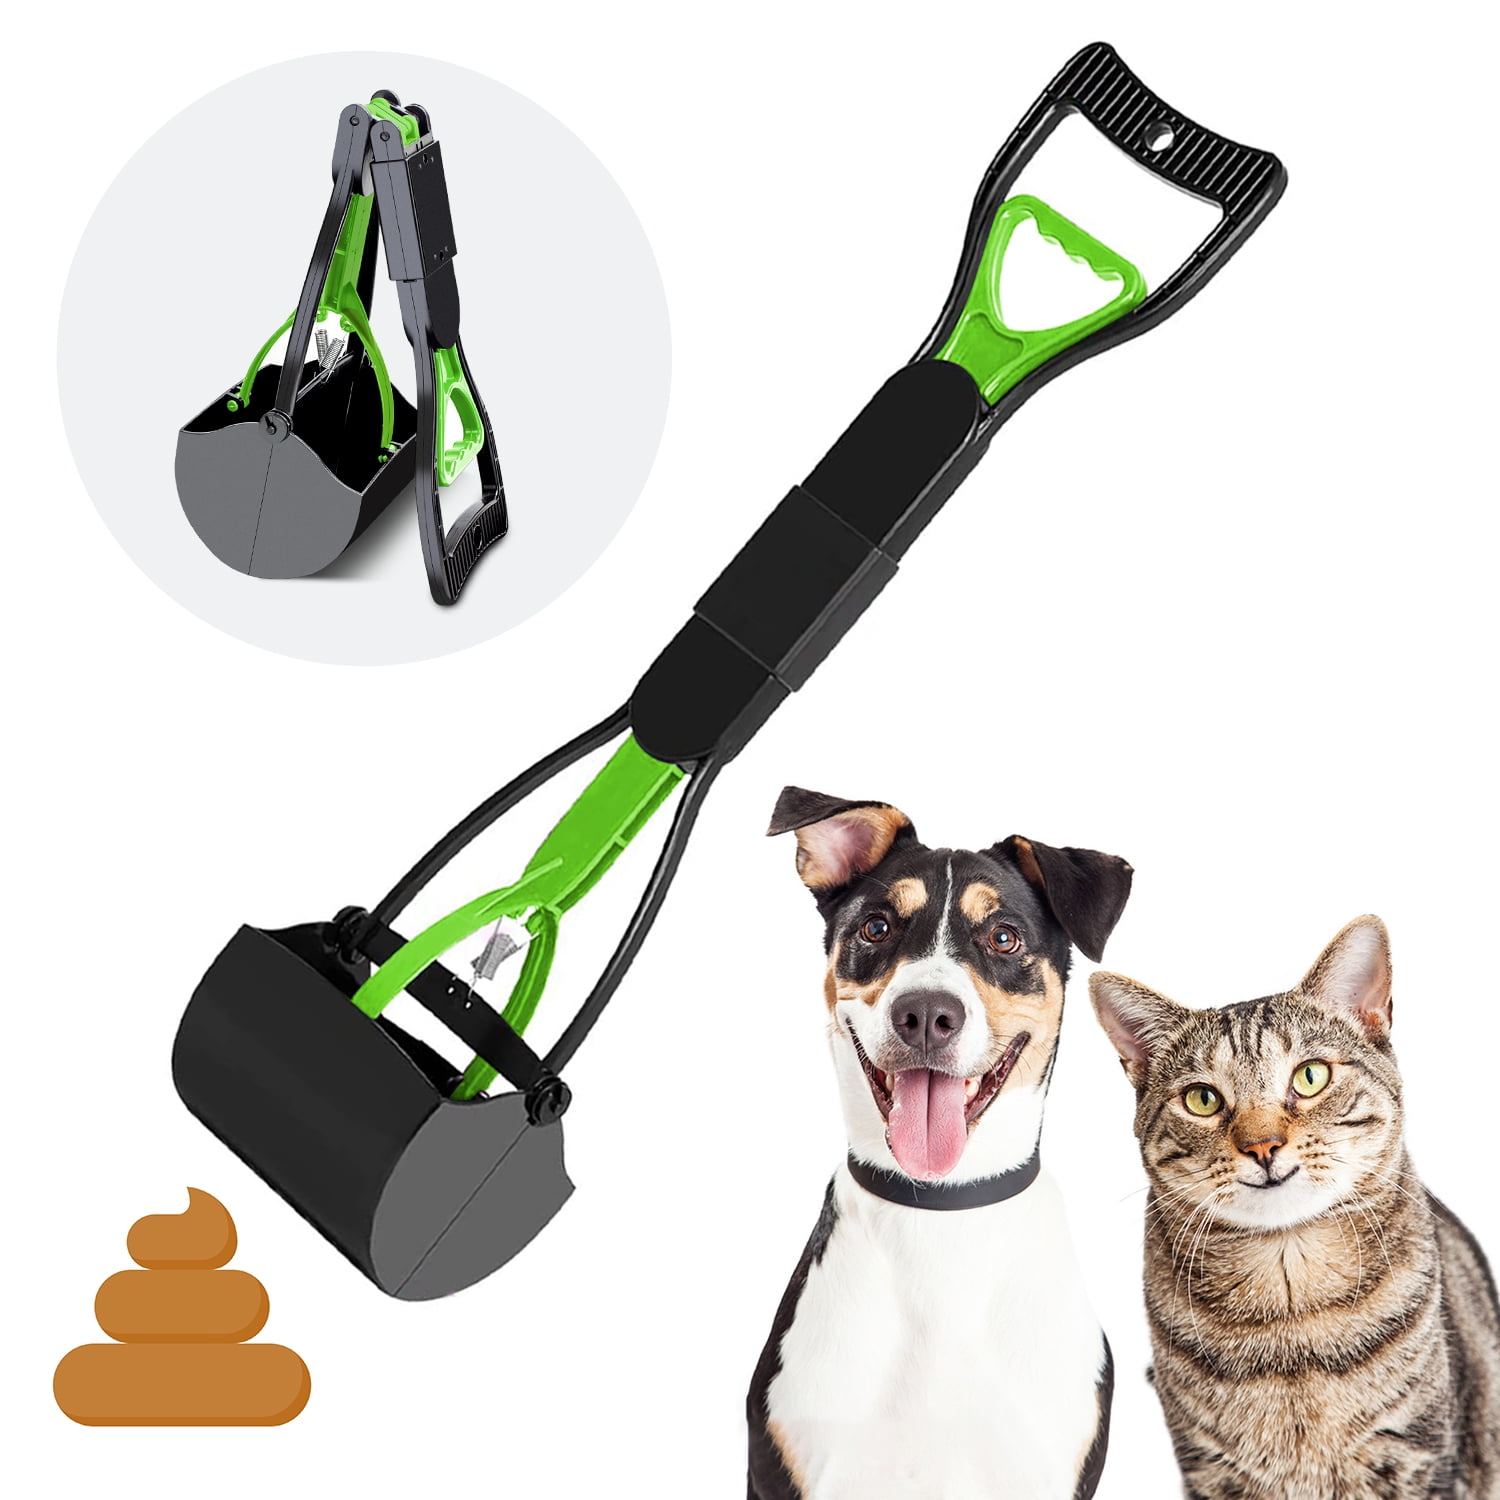 FOCUSPET Pet Pooper Scooper for Dogs and Cats Foldable Portable Poop Waste Pick Up Rake for Large & Small Dogs Long Handle Non-Breakable High Strength Material and Durable,Jaw Claw for Grass & Gravel 